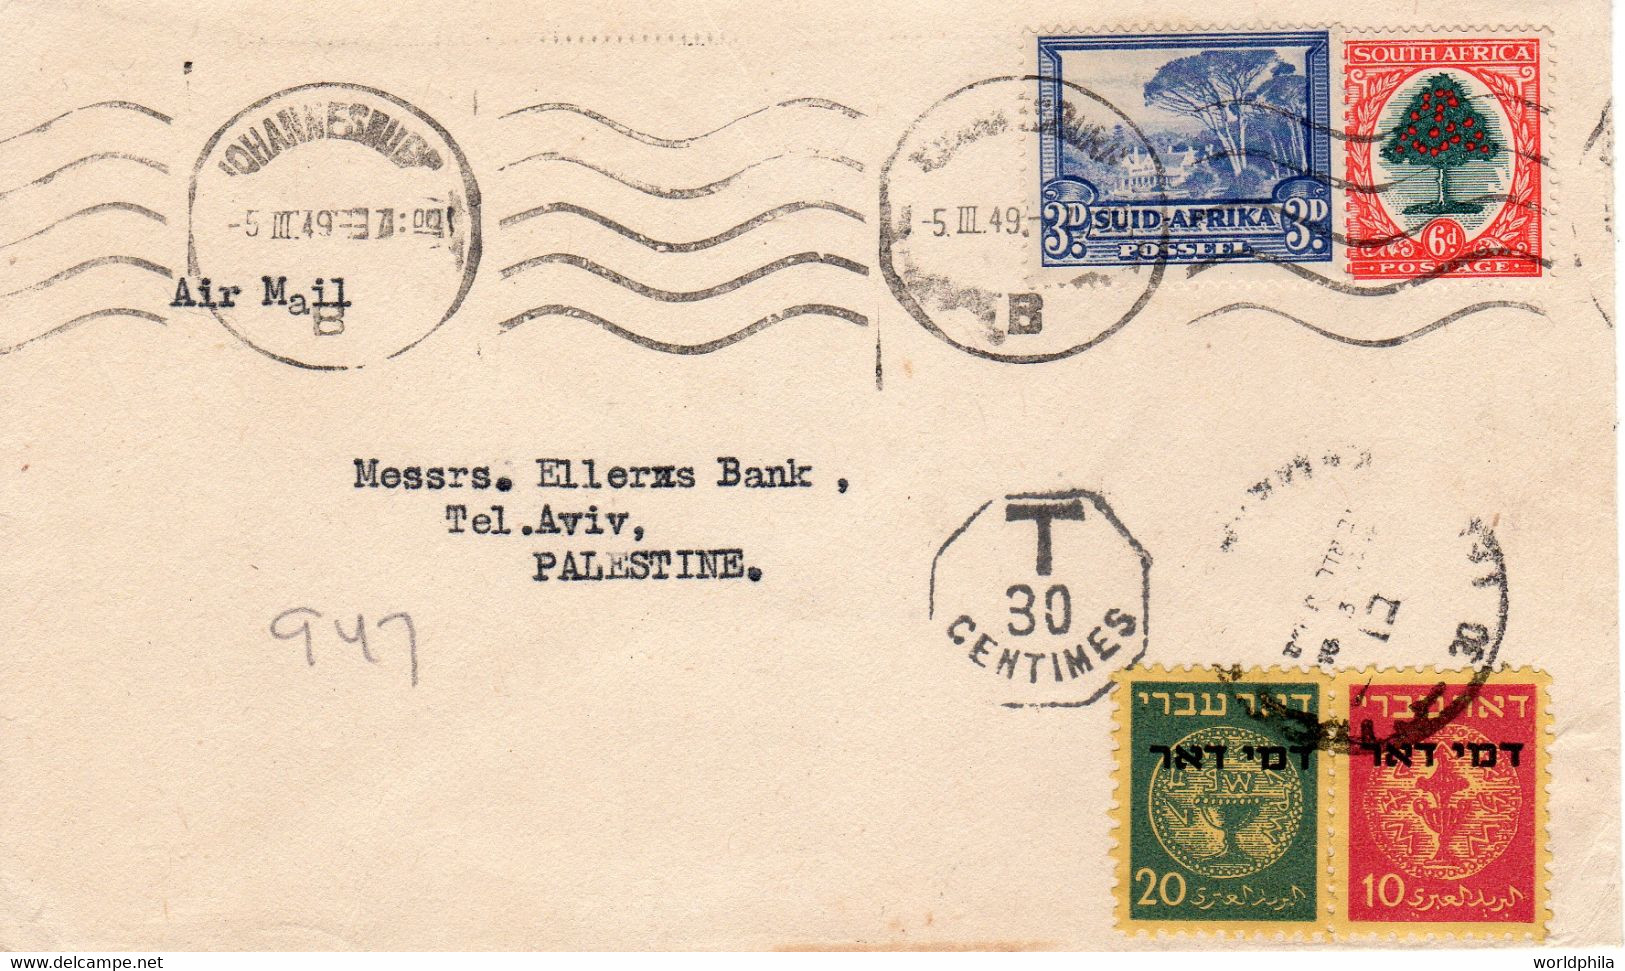 South Africa-Israel 1949 Postage Due I, Bale PD3,4 Overprinted Doar Ivri Stamps, Postal History, High Value Cover - Postage Due